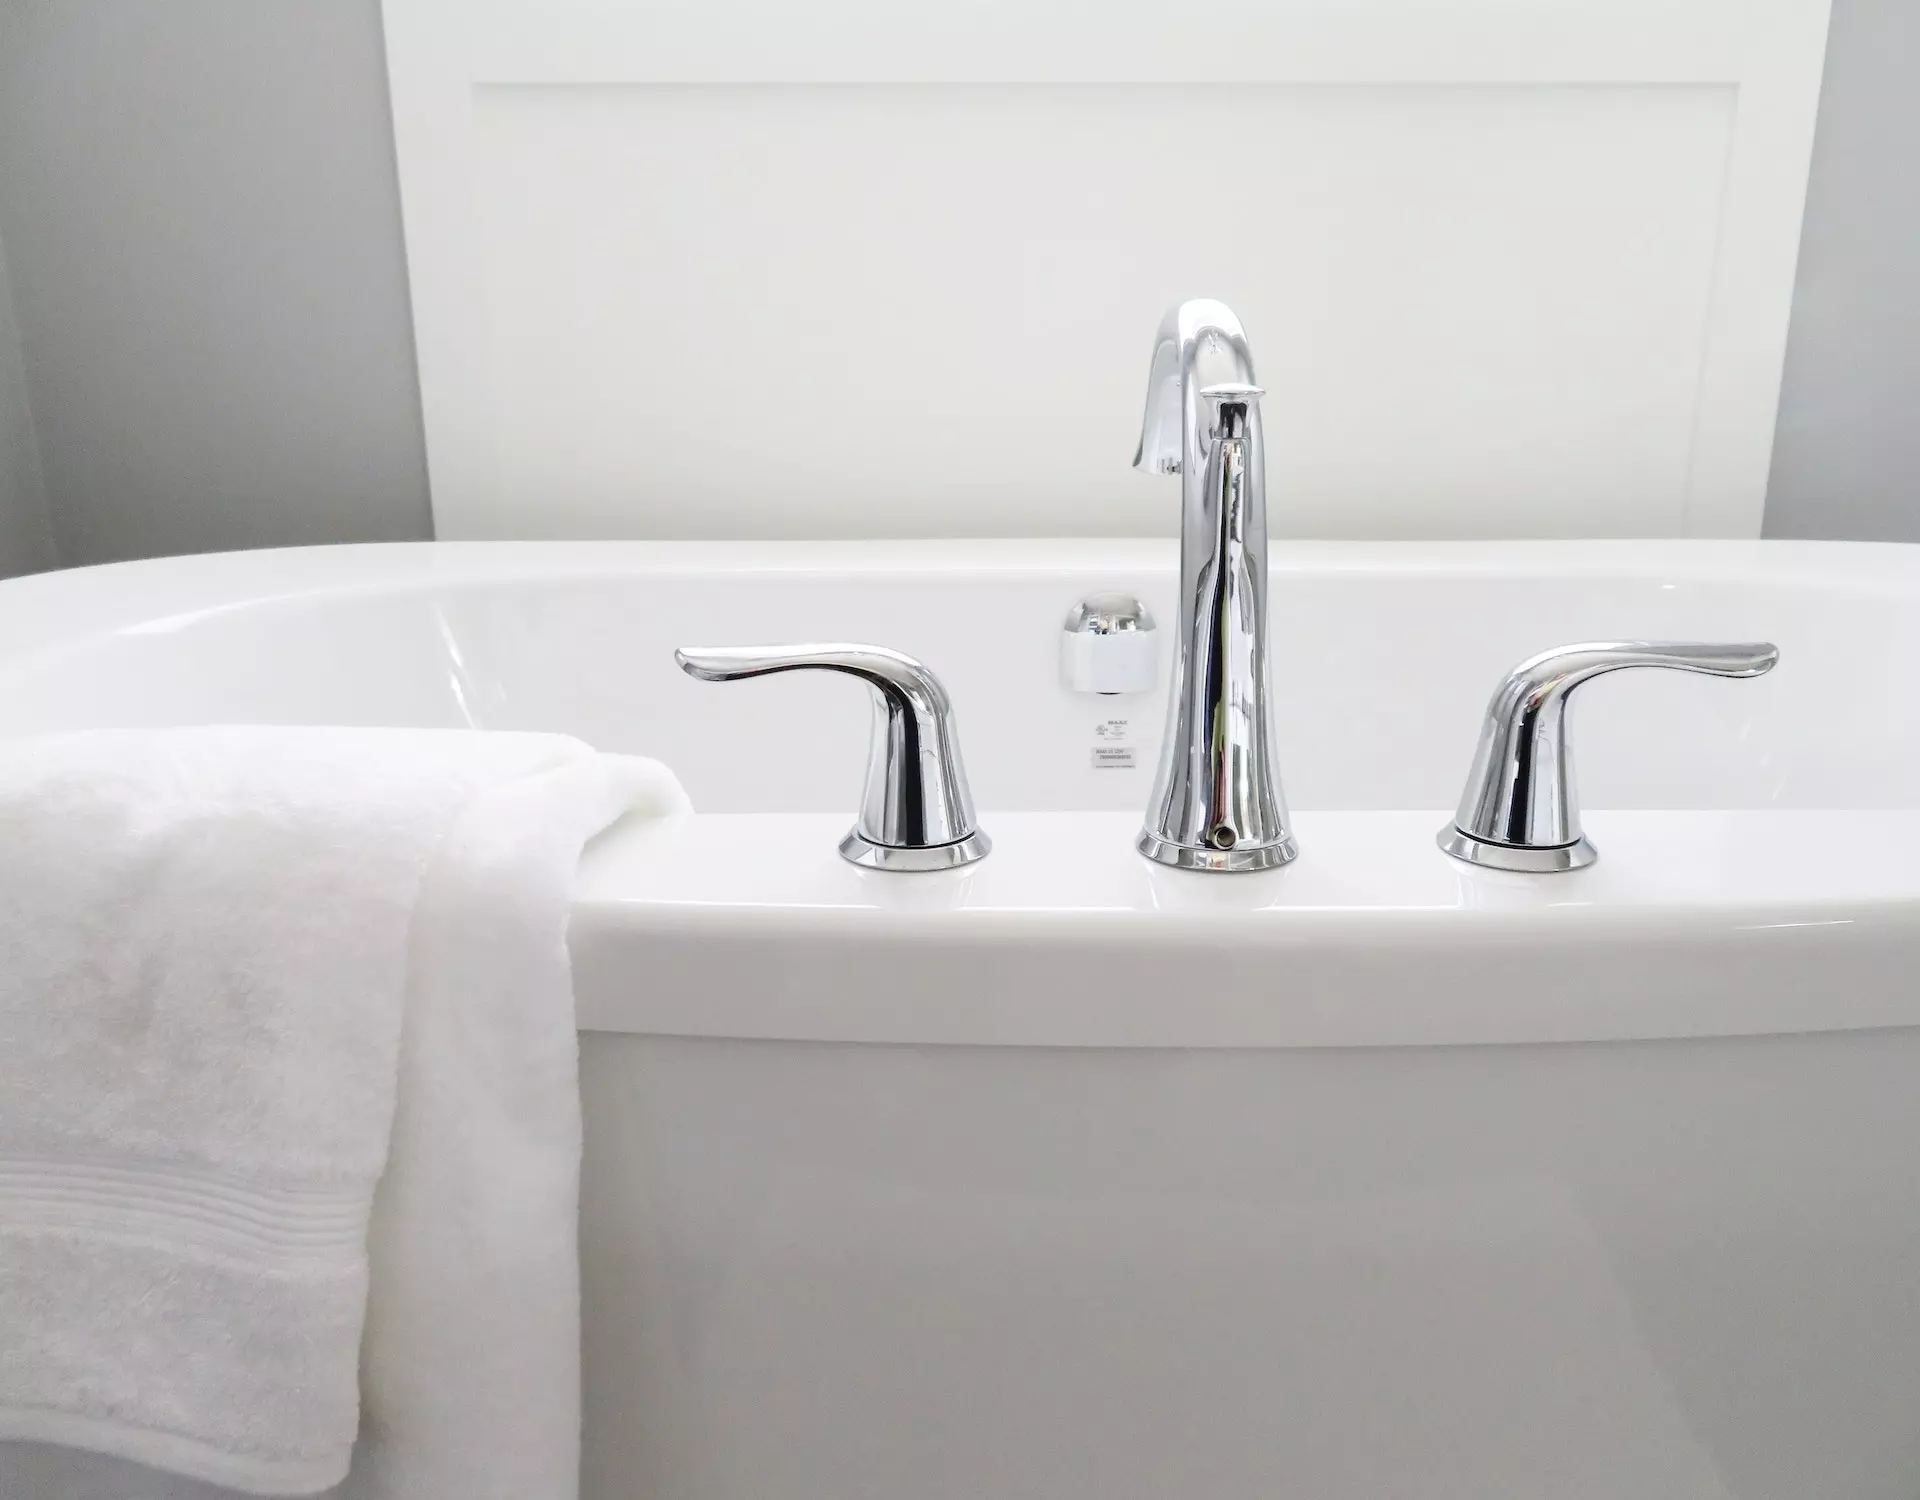 Name Brand Faucets vs. Off-Brand Faucets: Which is the Better Value for Homeowners?